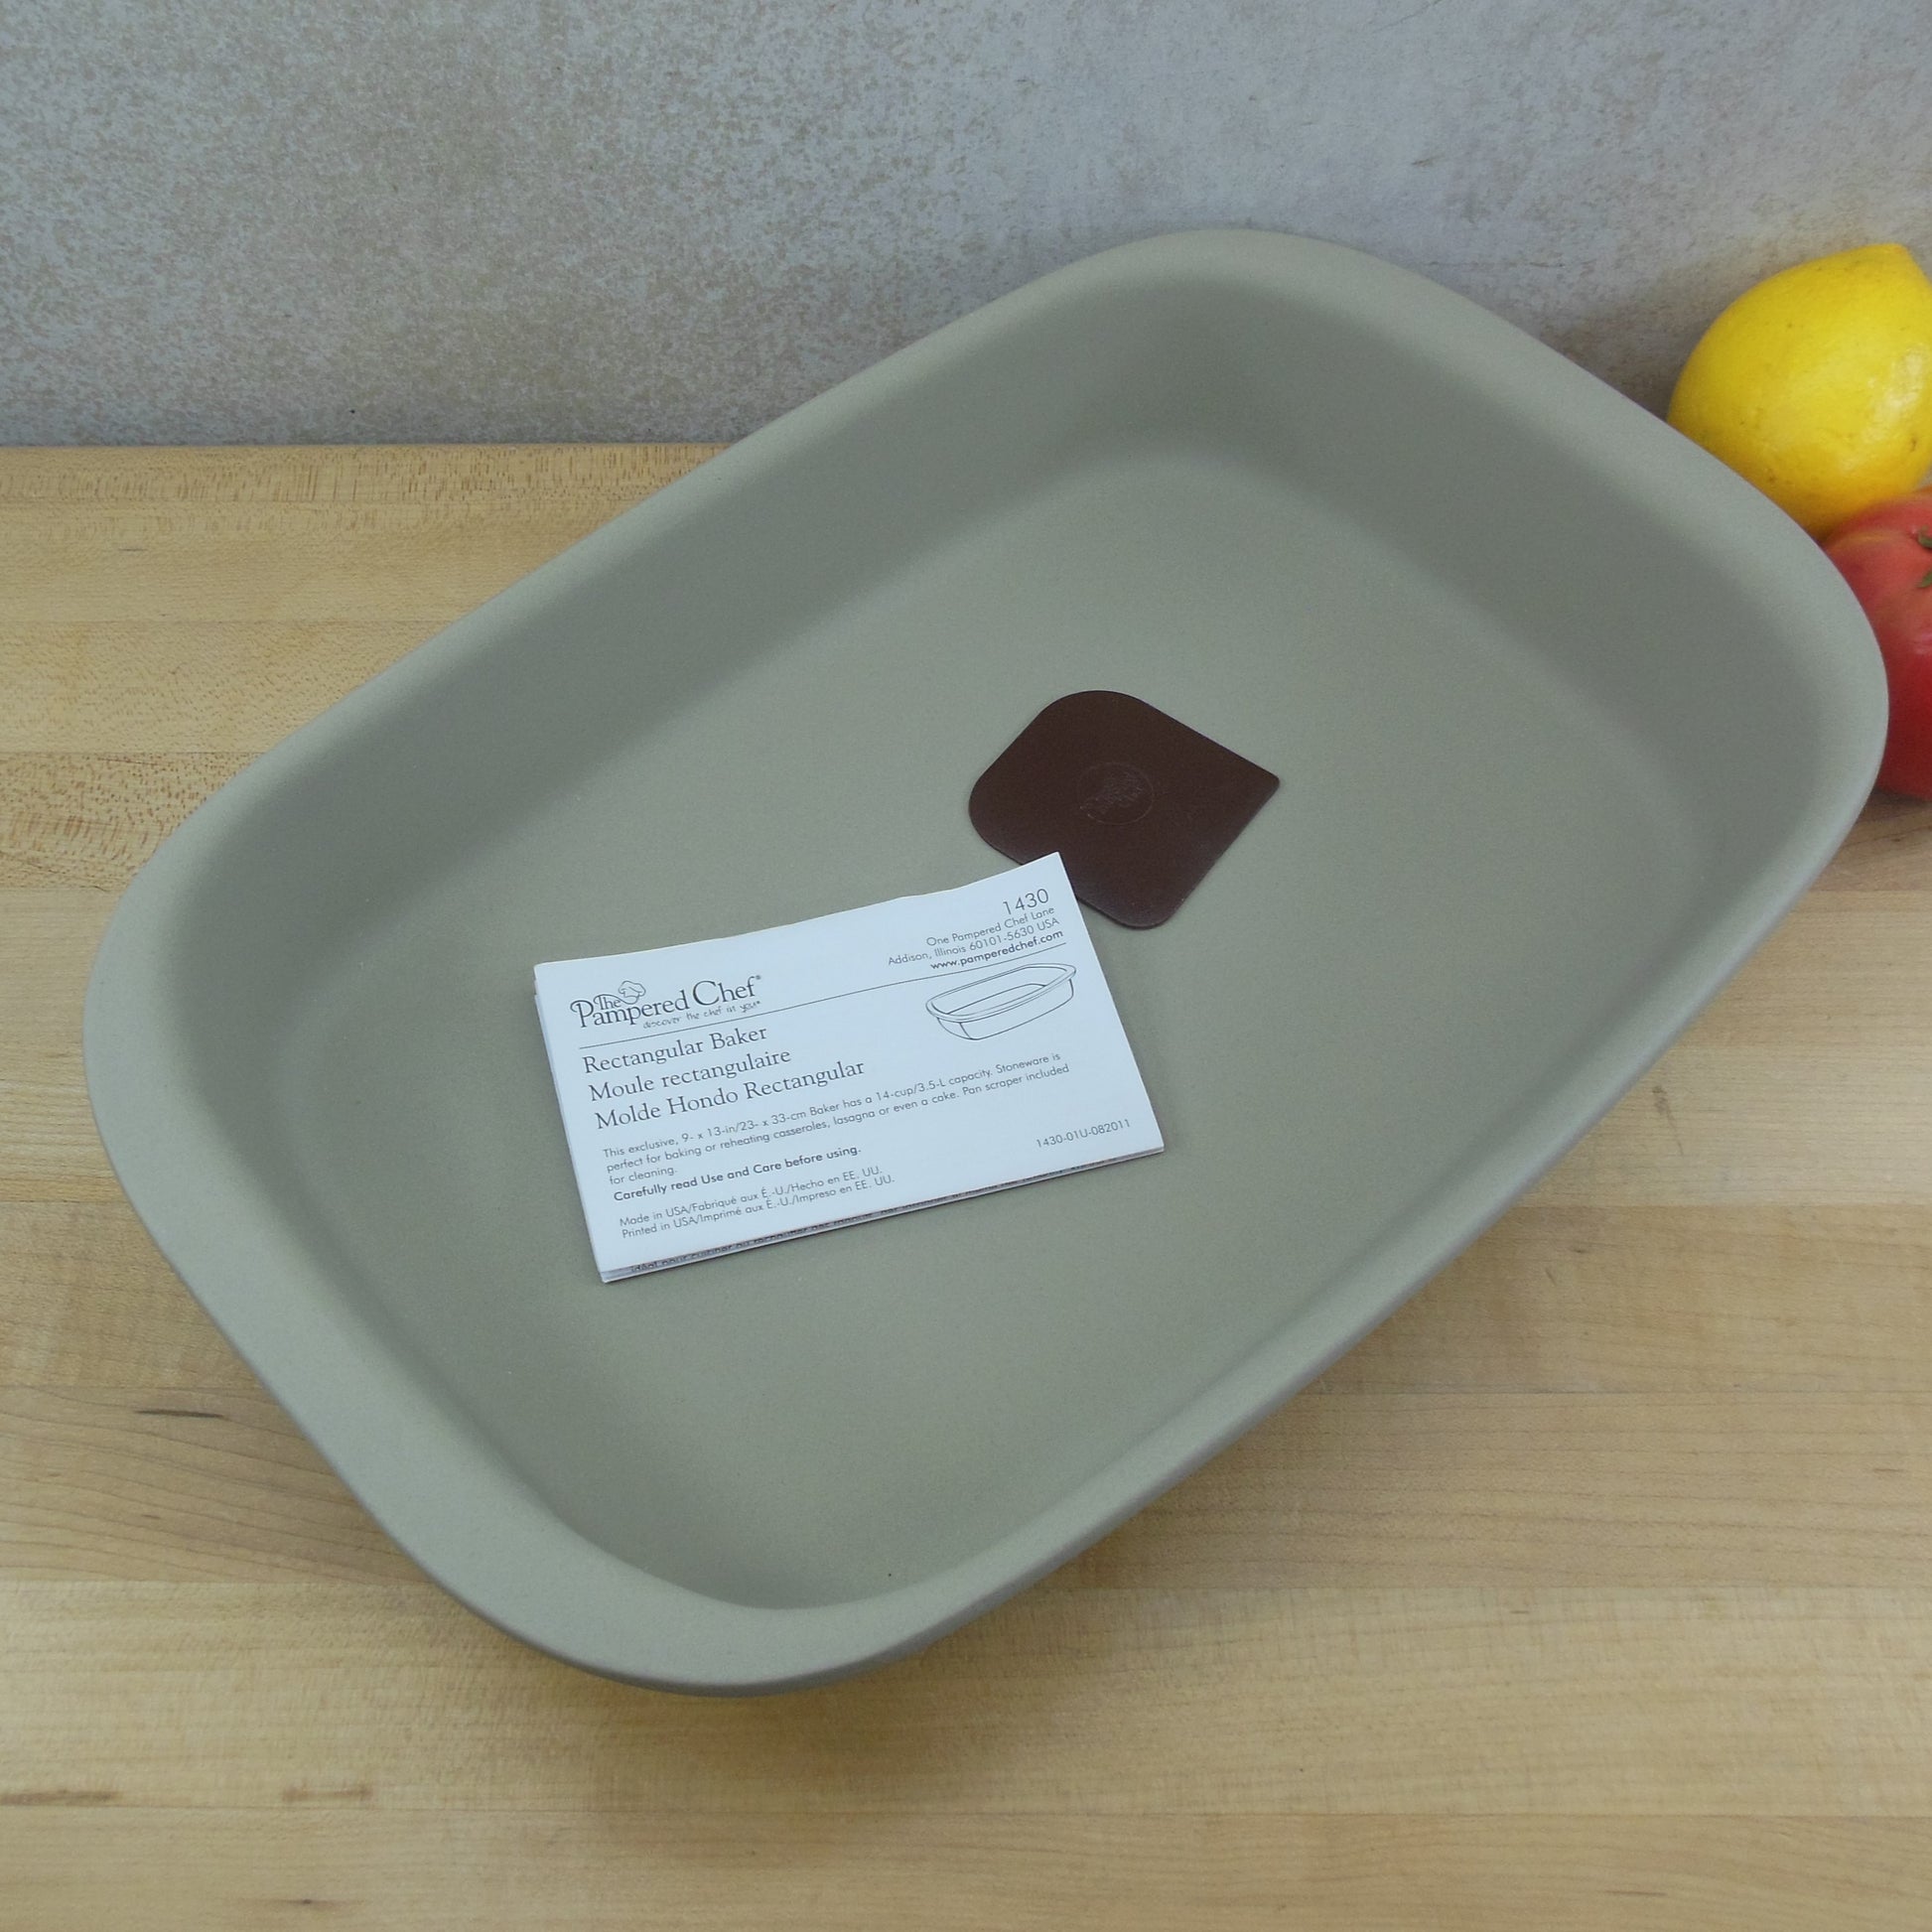 Stoneware Casserole Dish by The Pampered Chef